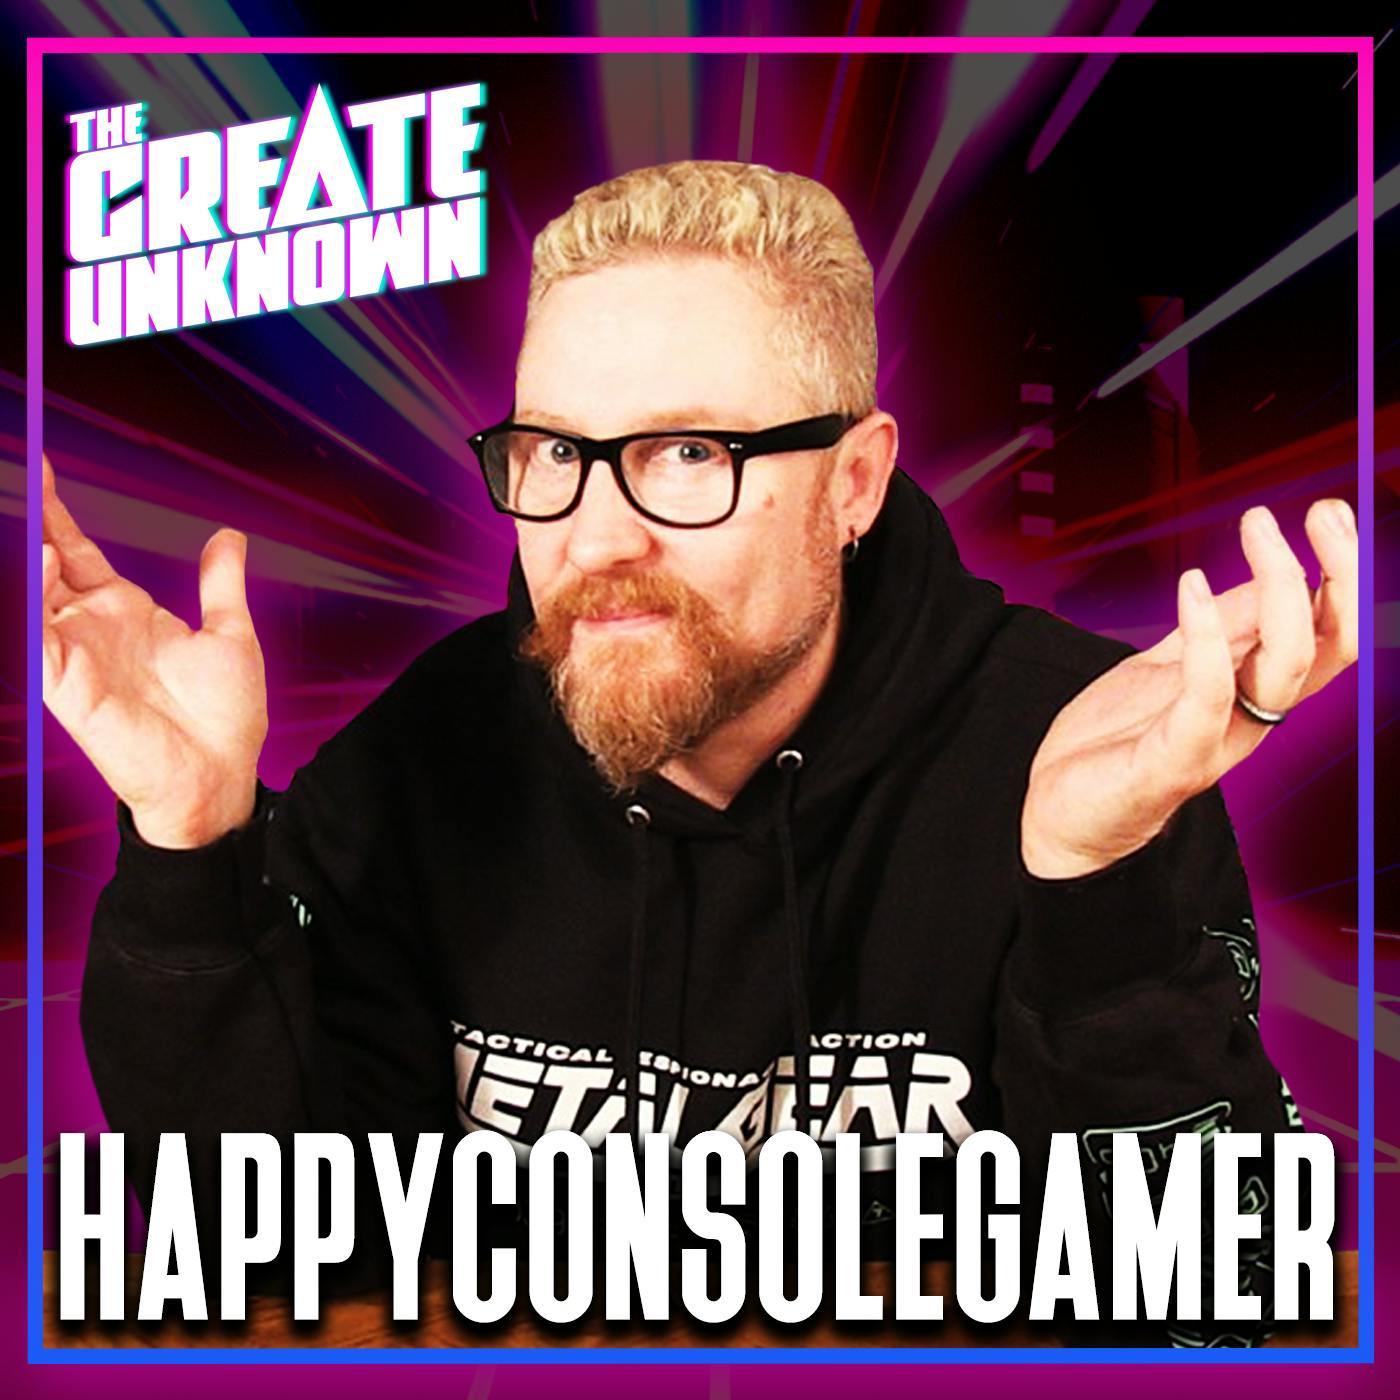 The Immortal Passion of HappyConsoleGamer